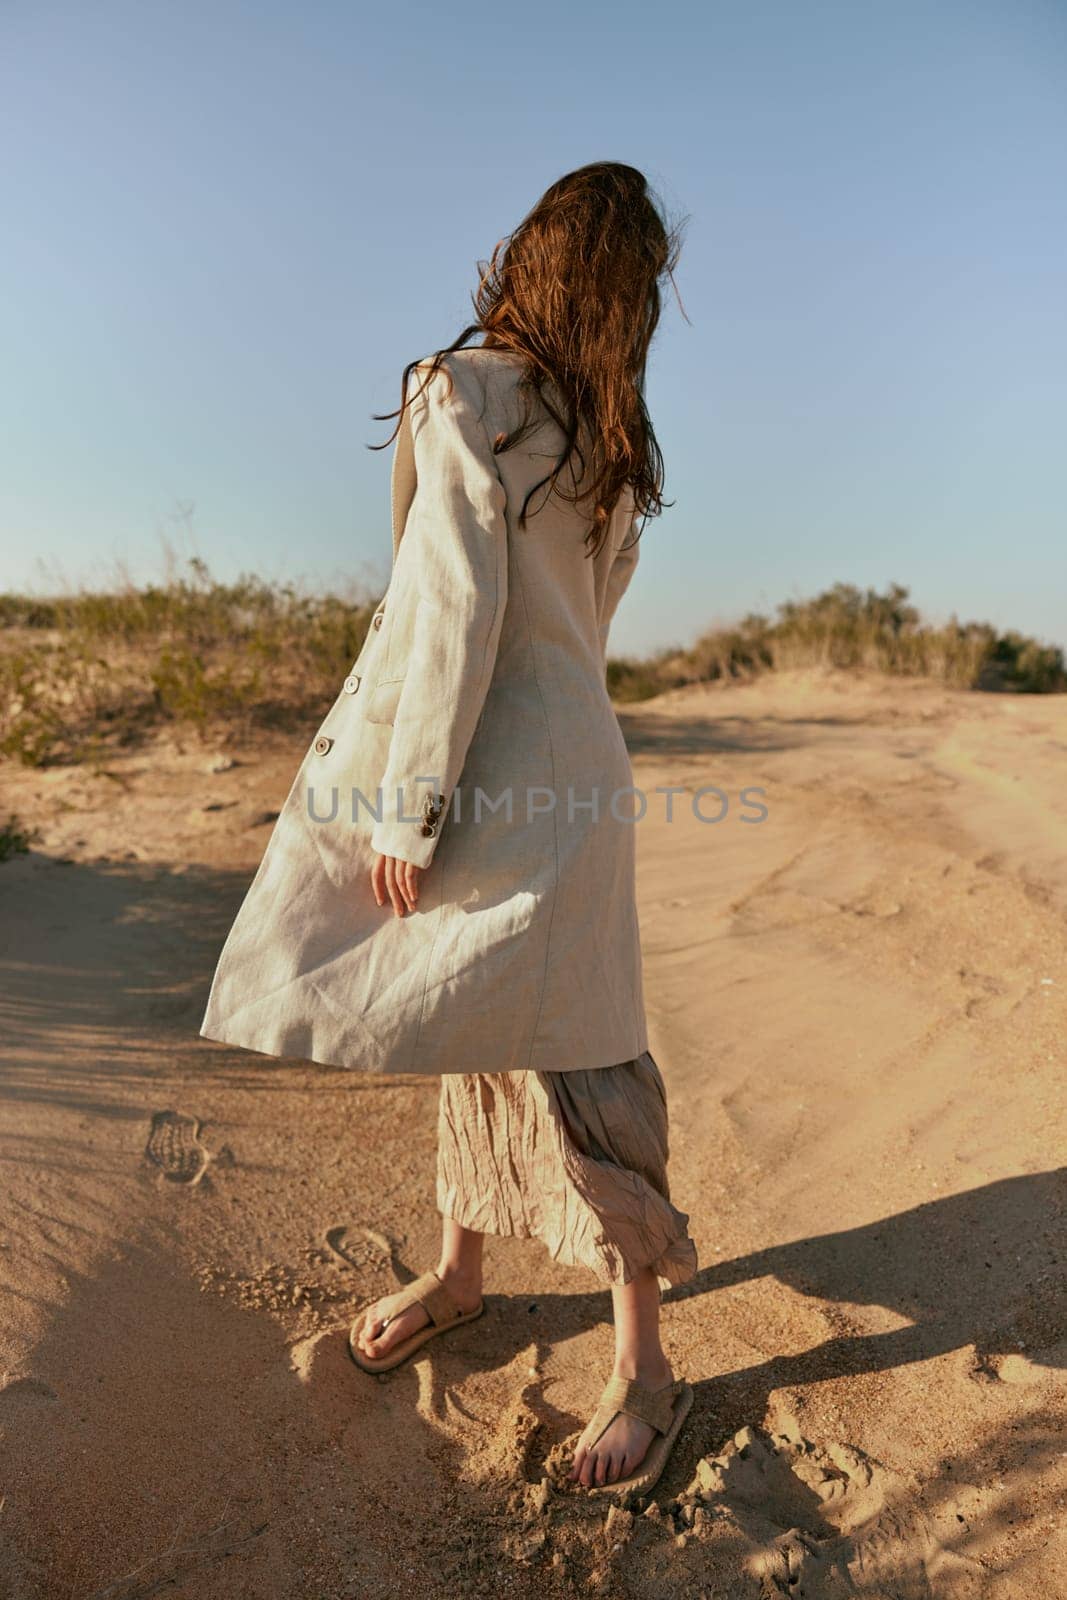 stylish woman in a light jacket posing on the sand, turning away from the camera by Vichizh